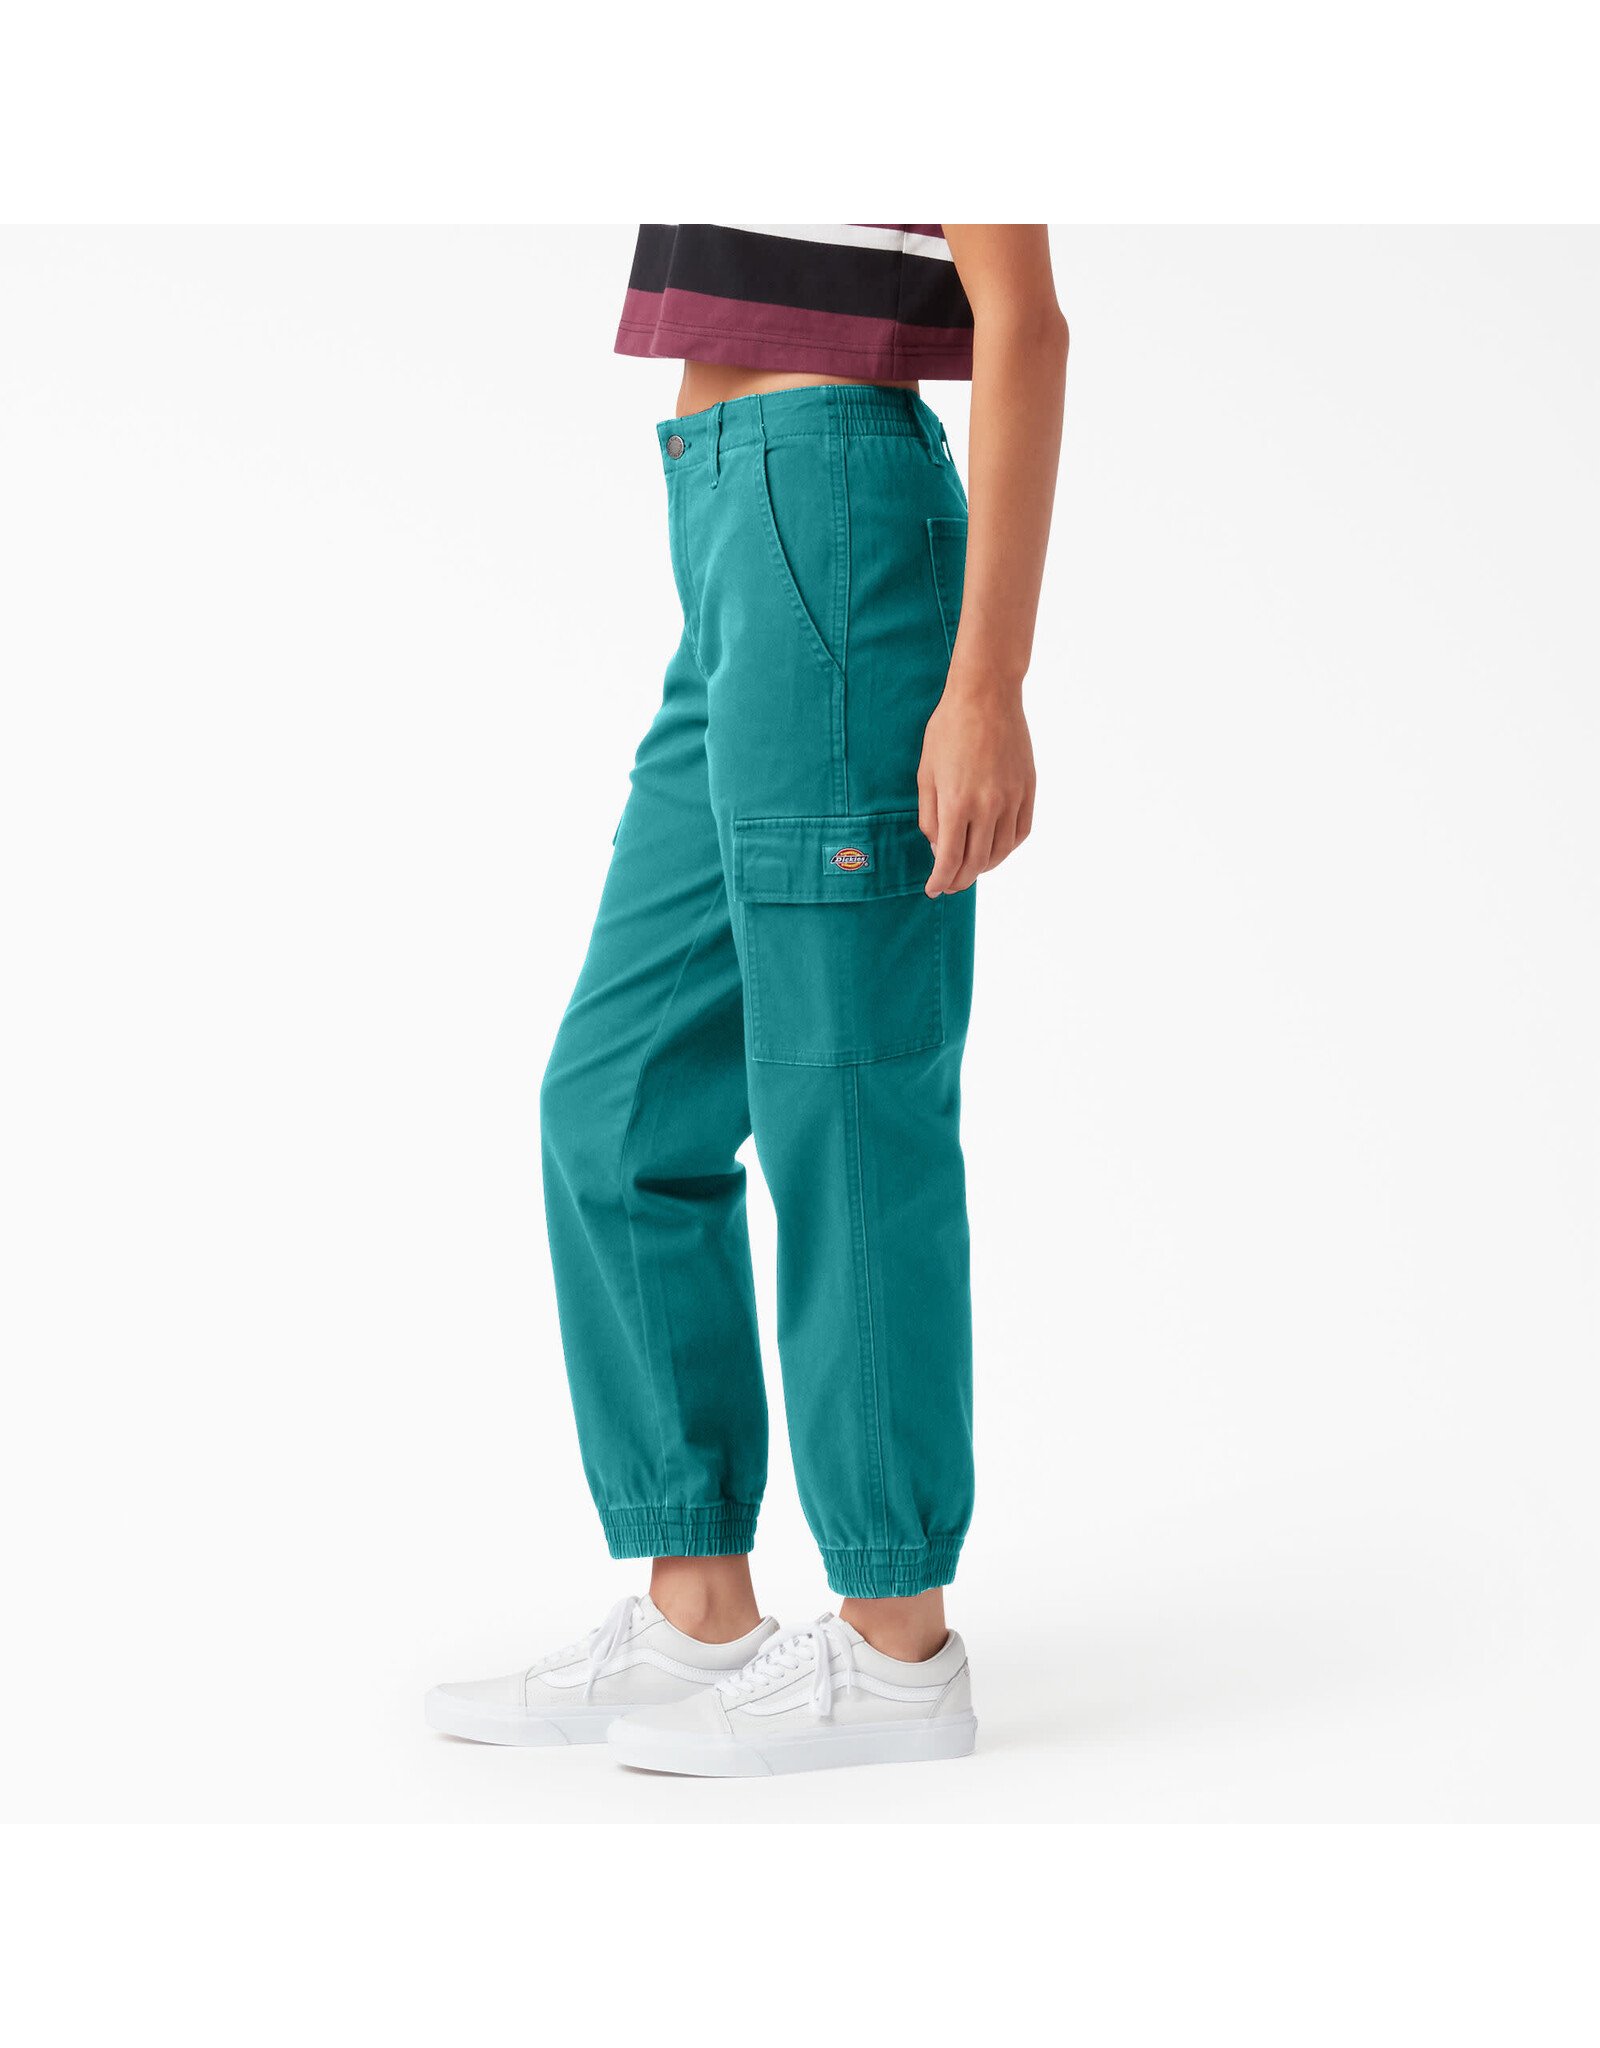 DICKIES Women's High Rise Fit Cargo Jogger Pants Deep Lake - FPR54DL2